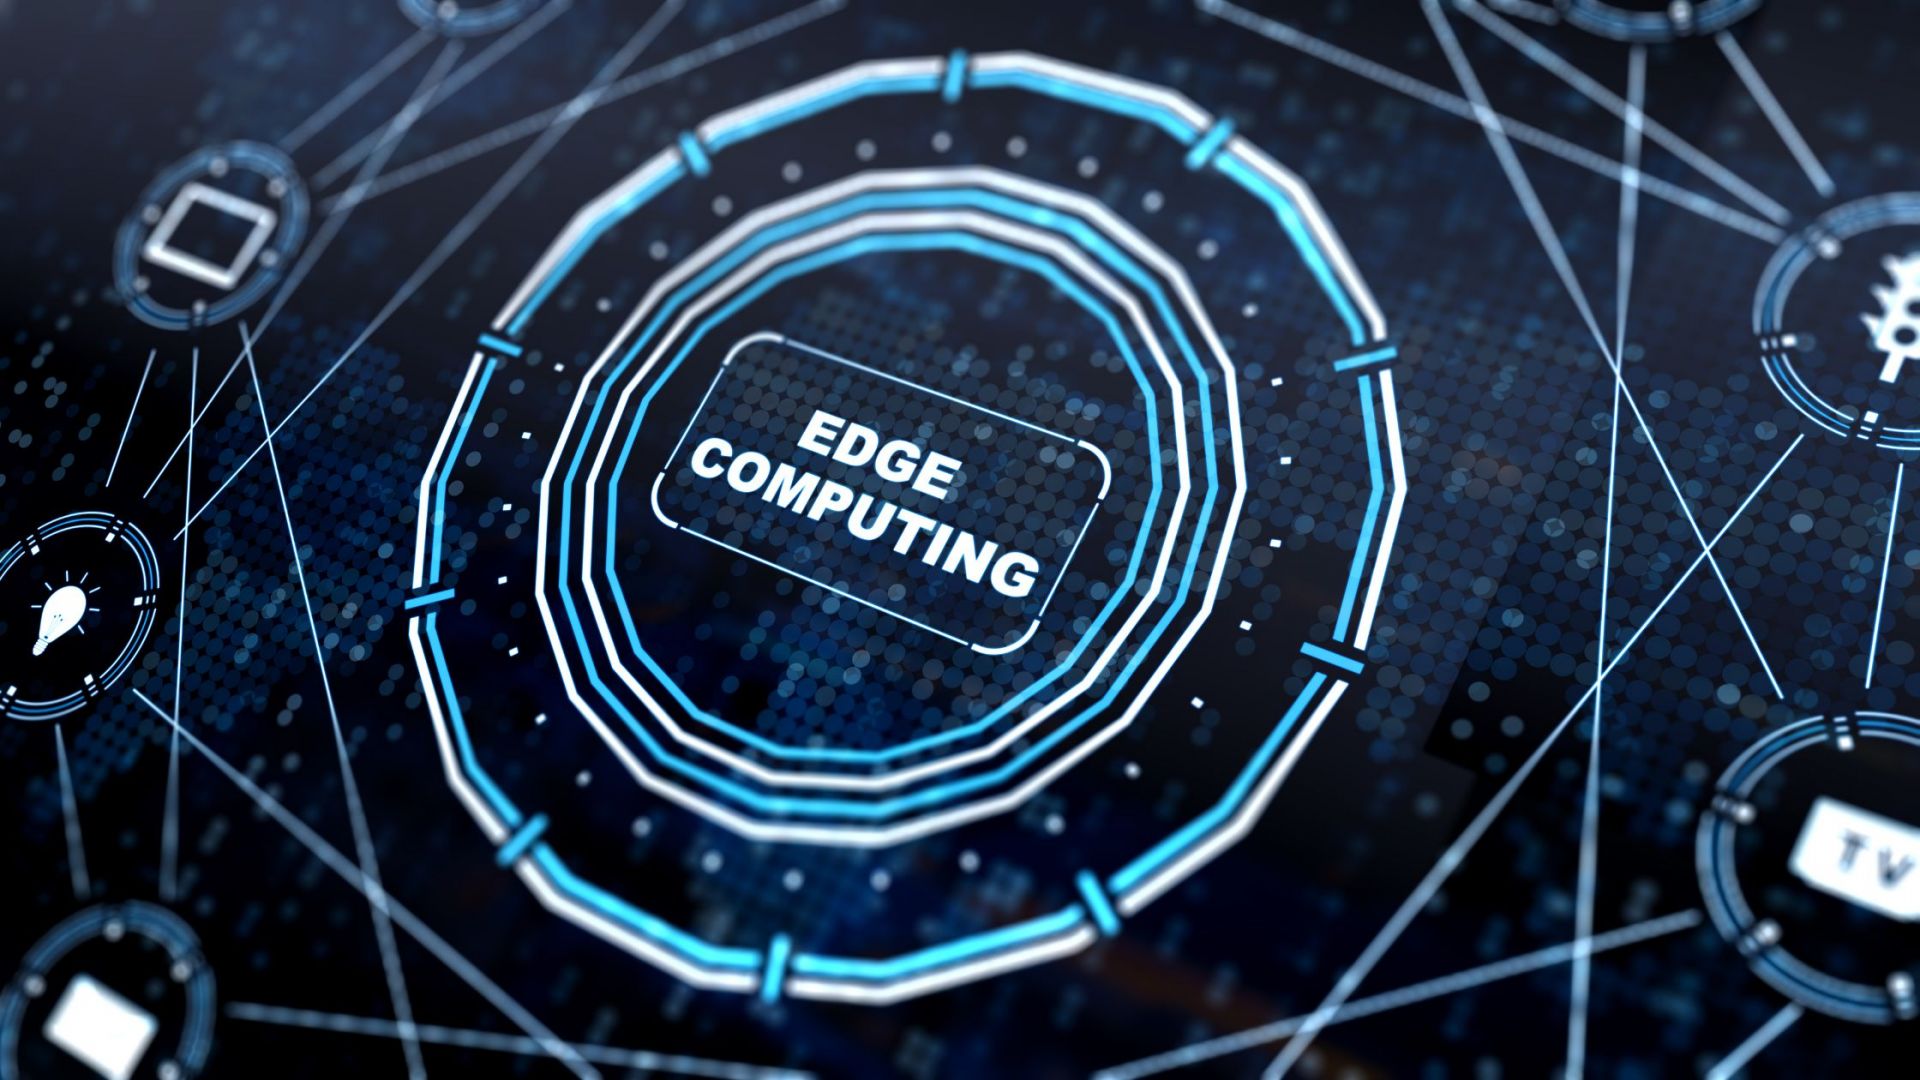 Edge computing is increasingly recommended and implemented as a much safer alternative to fix this issue. So, keep reading to find out more about edge computing and how we can use it to improve sustainability.